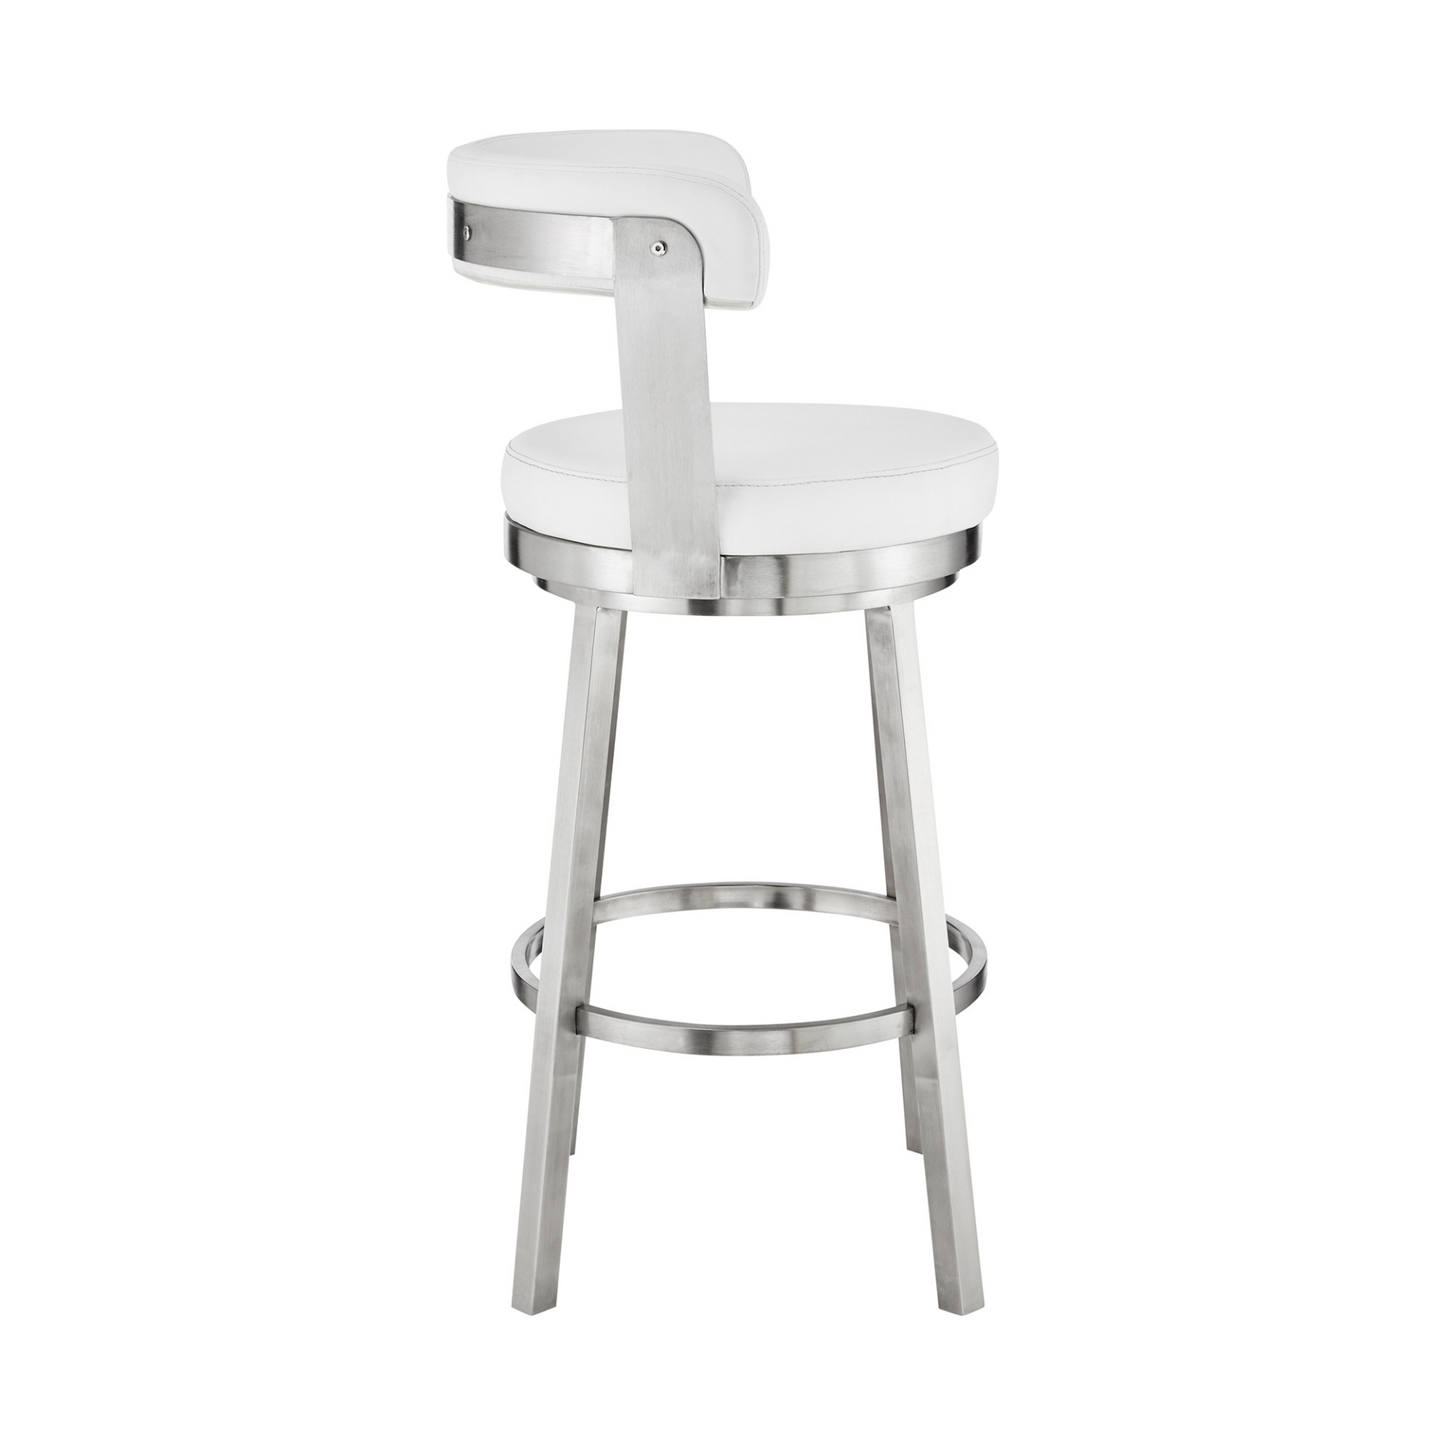 "26"" Chic White Faux Leather with Stainless Steel Finish Swivel Bar Stool"